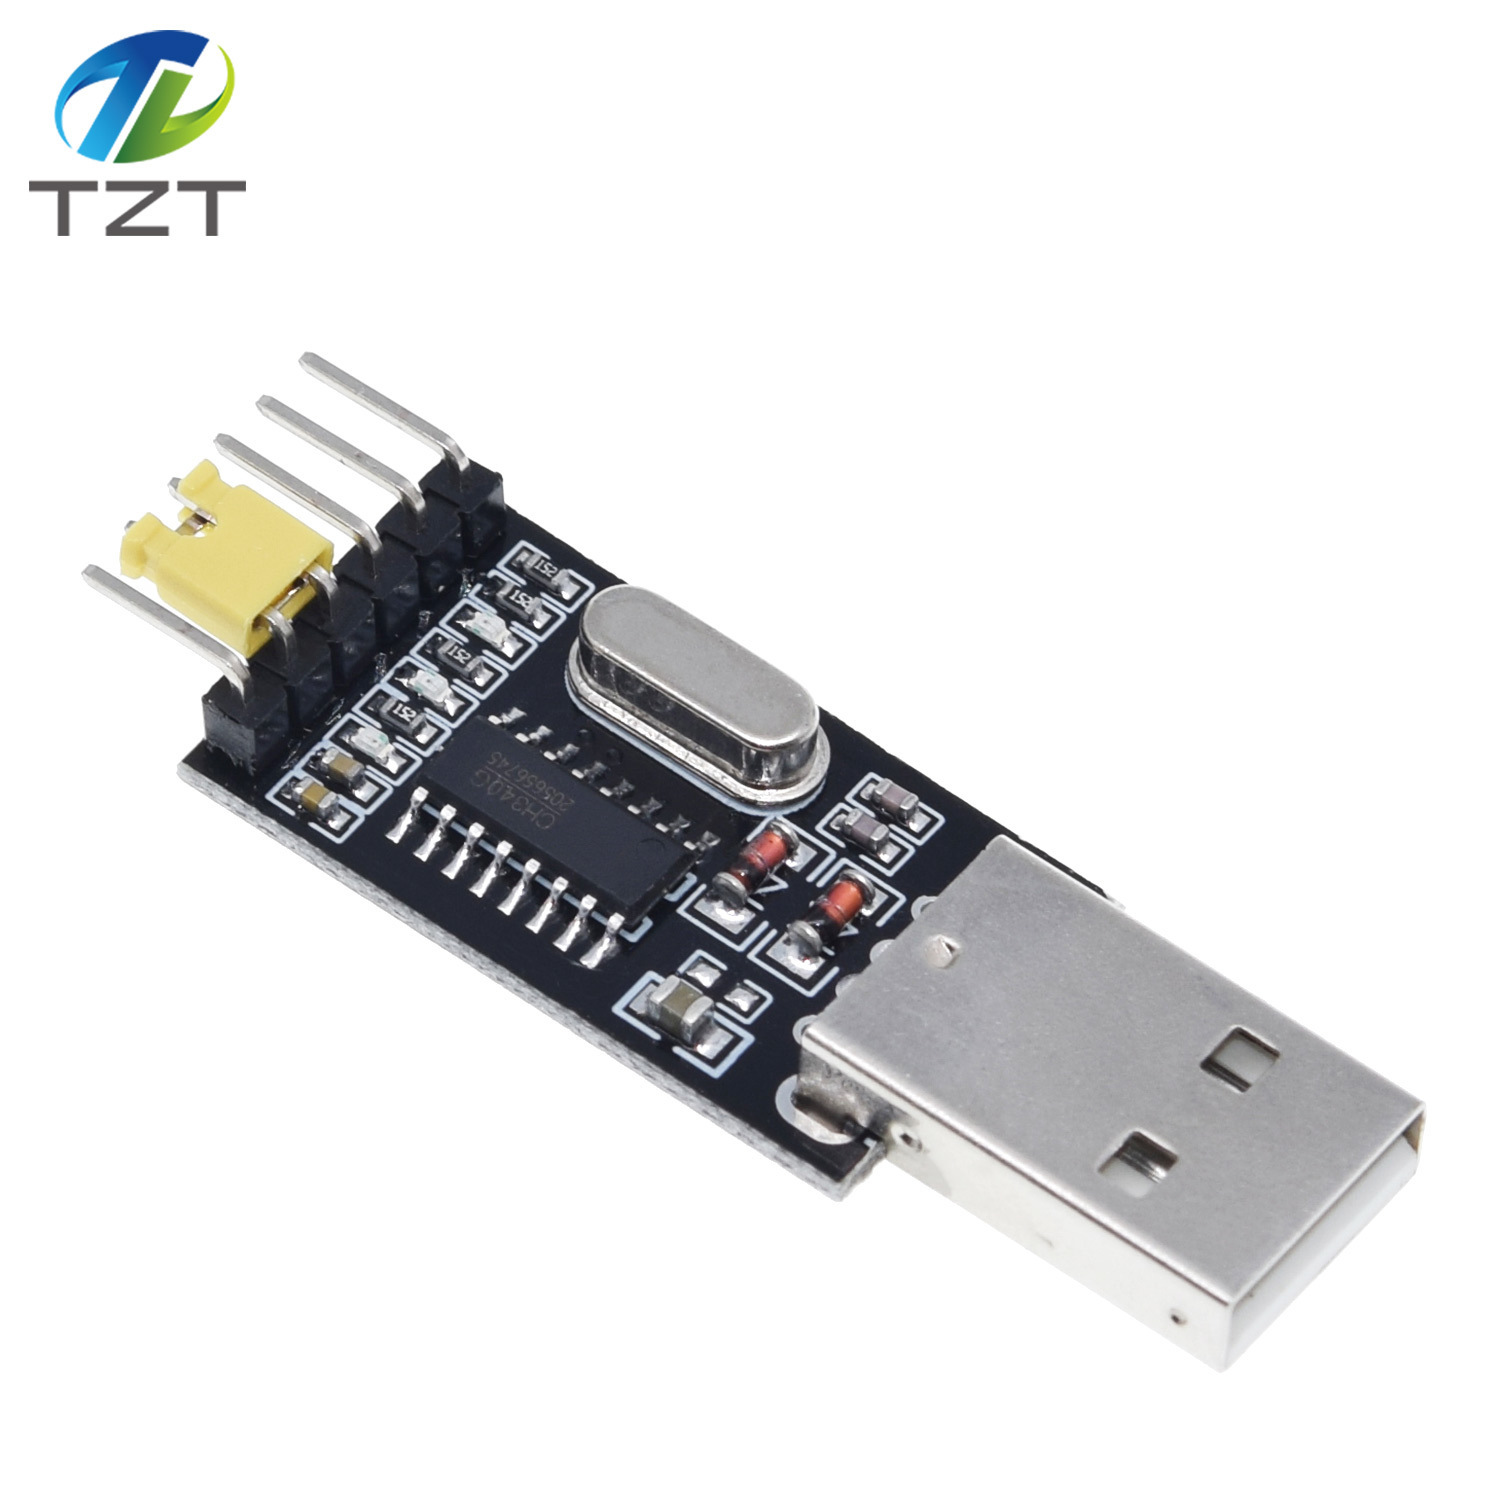 TZT CH340 module USB to TTL CH340G upgrade download a small wire brush plate STC microcontroller board USB to serial